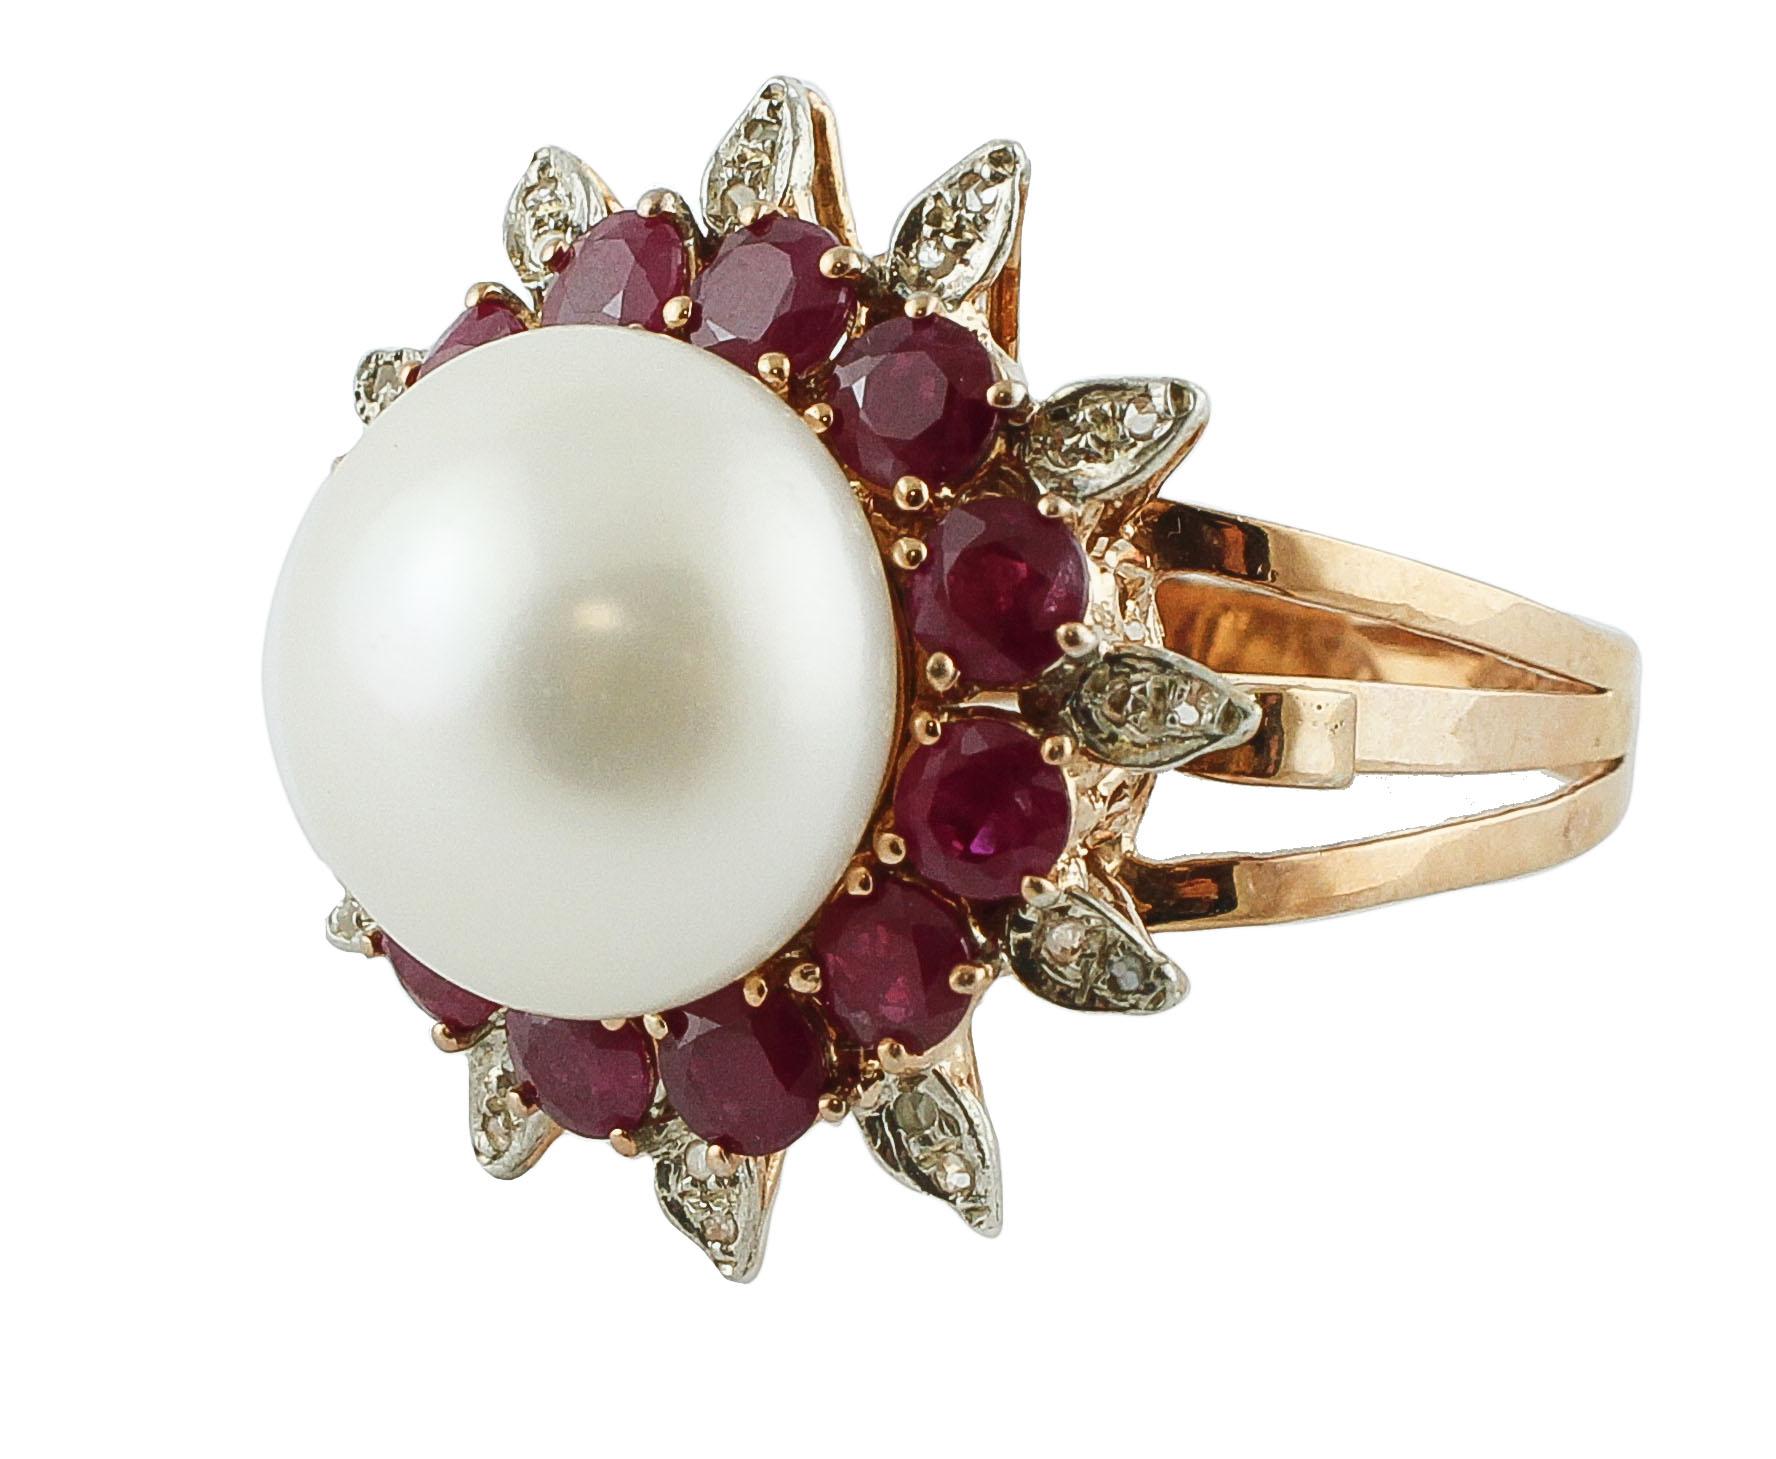 Amazing cluster flower theme ring in 9K rose gold and silver structure mounted with a glossy white pearl in the center (2.60 g) surrounded by 3.25 ct of intense color rubies crown, and it's adorned by leaves detailes studded by 0.11 ct of little